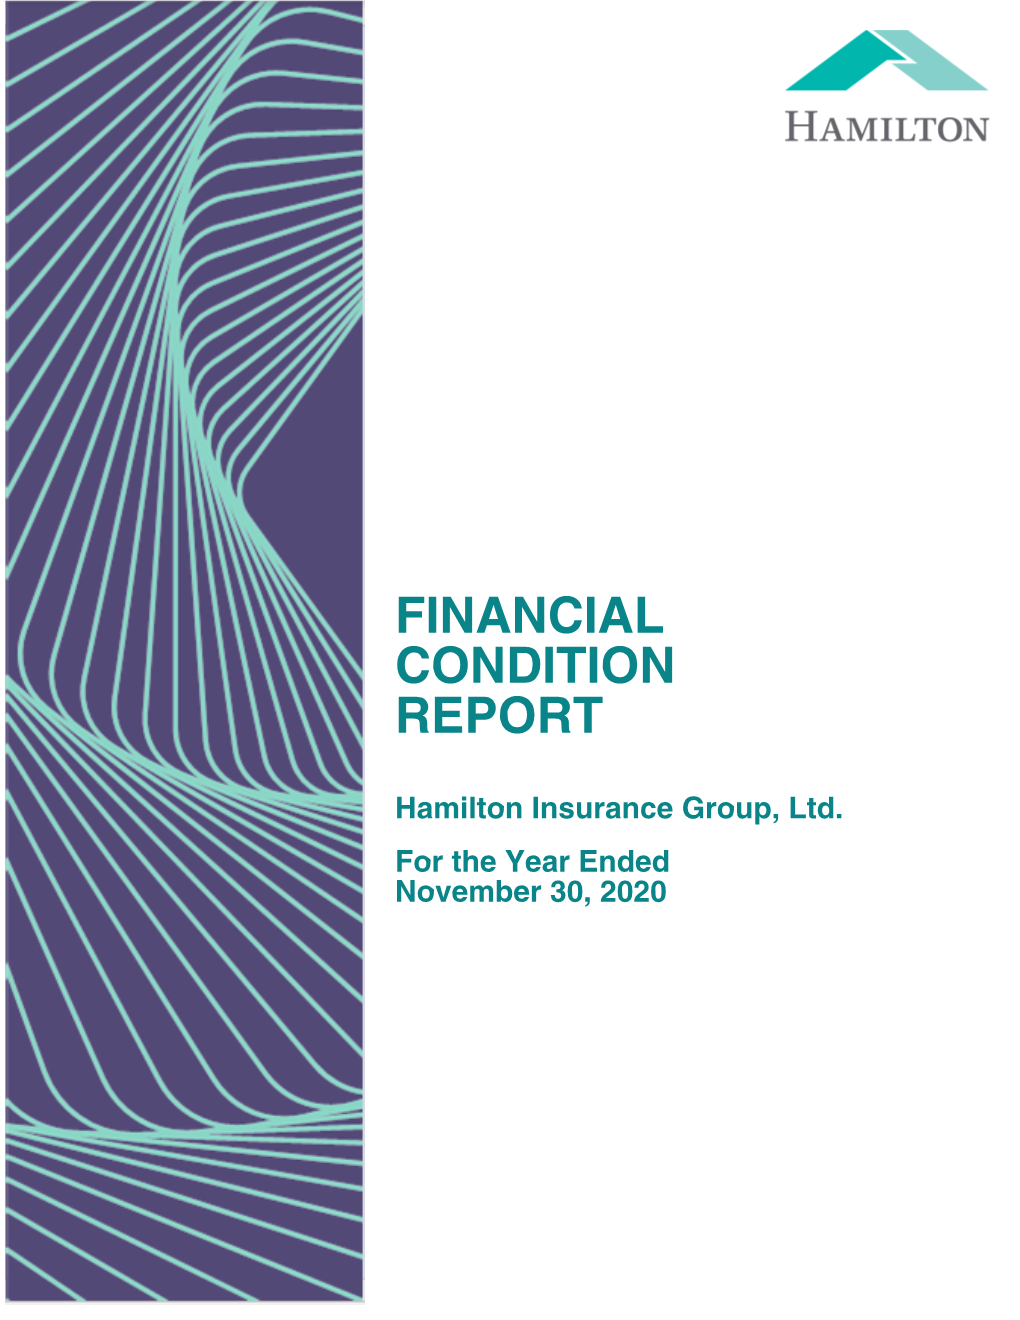 HIG Financial Condition Report 2020